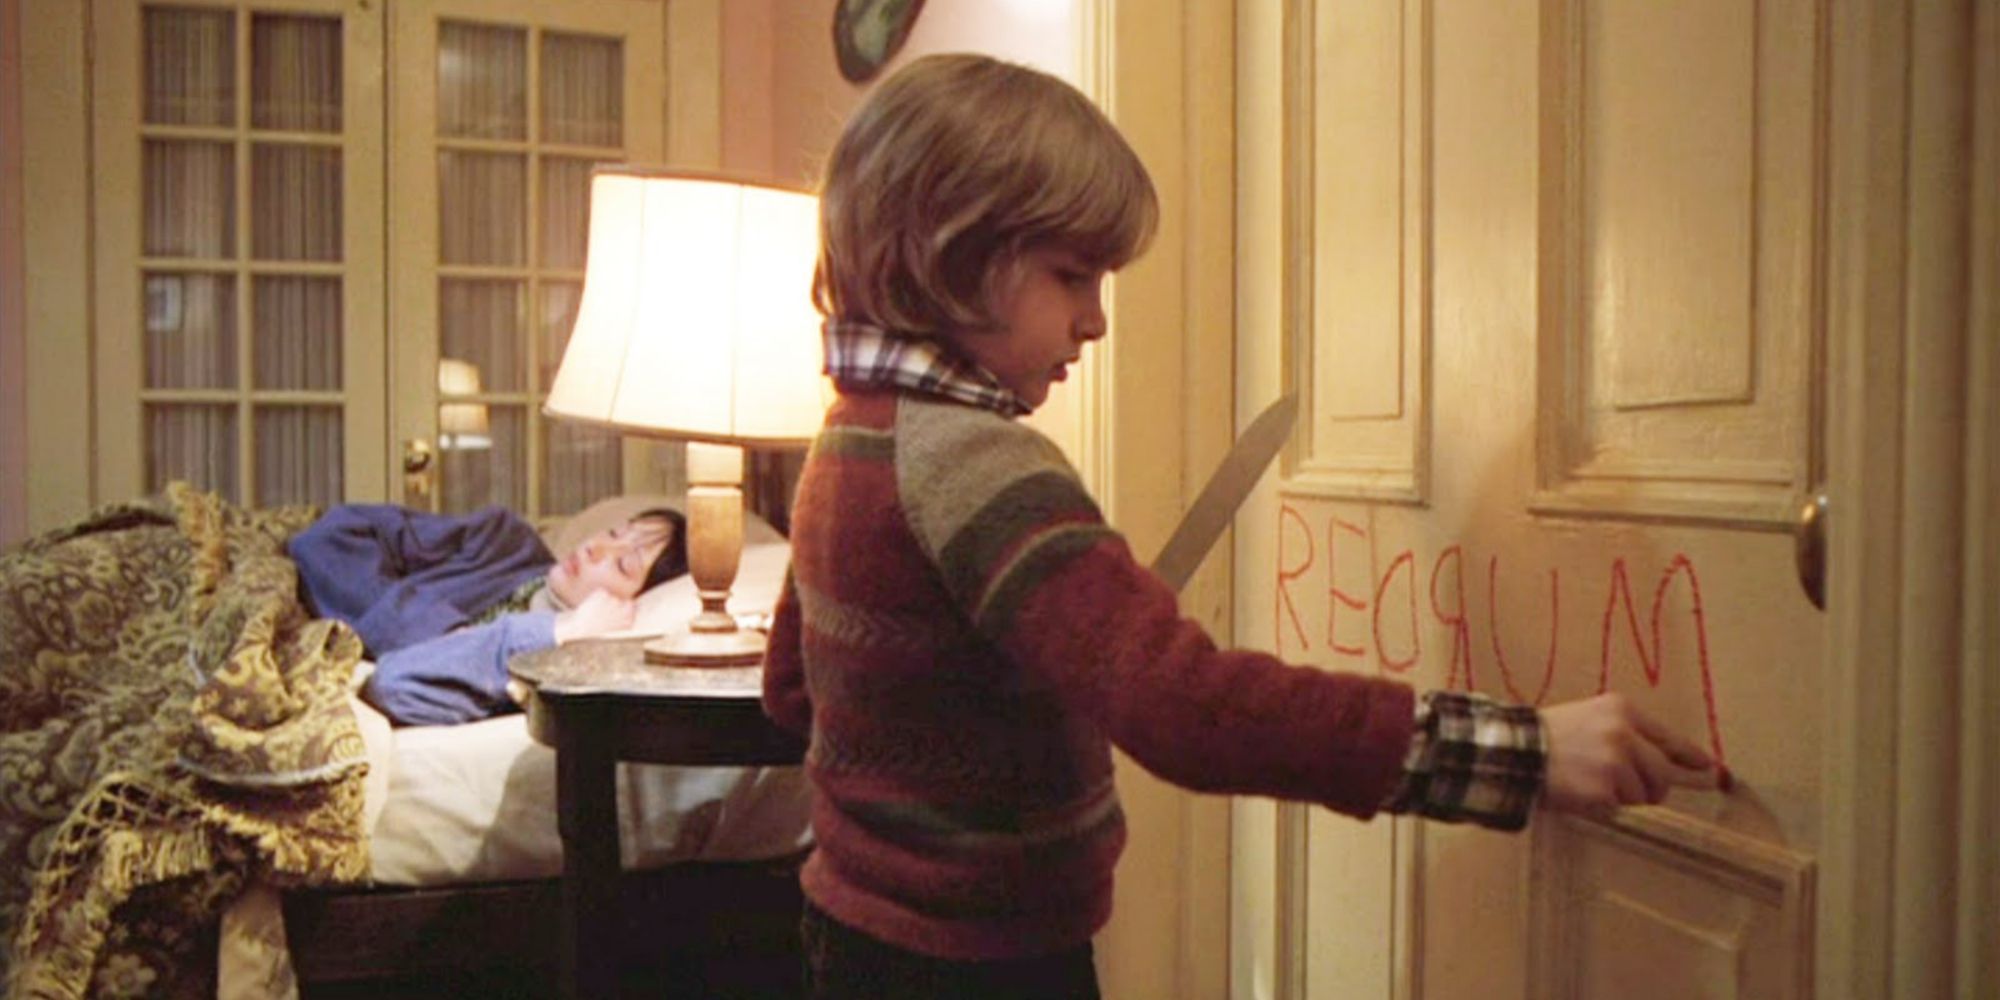 boy writing redrum on door holding knife: mother sleeping in bed in background